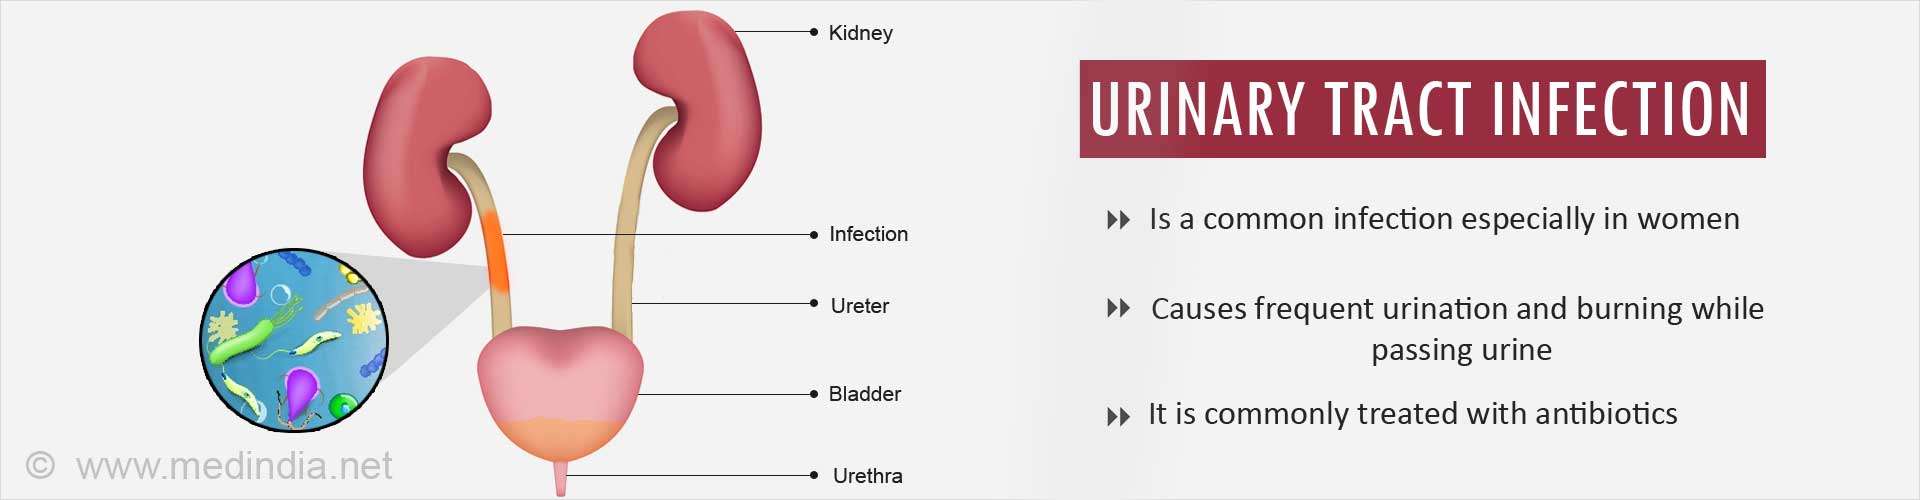 How to Prevent Urinary Tract Infection Recurrence Without Antibiotics